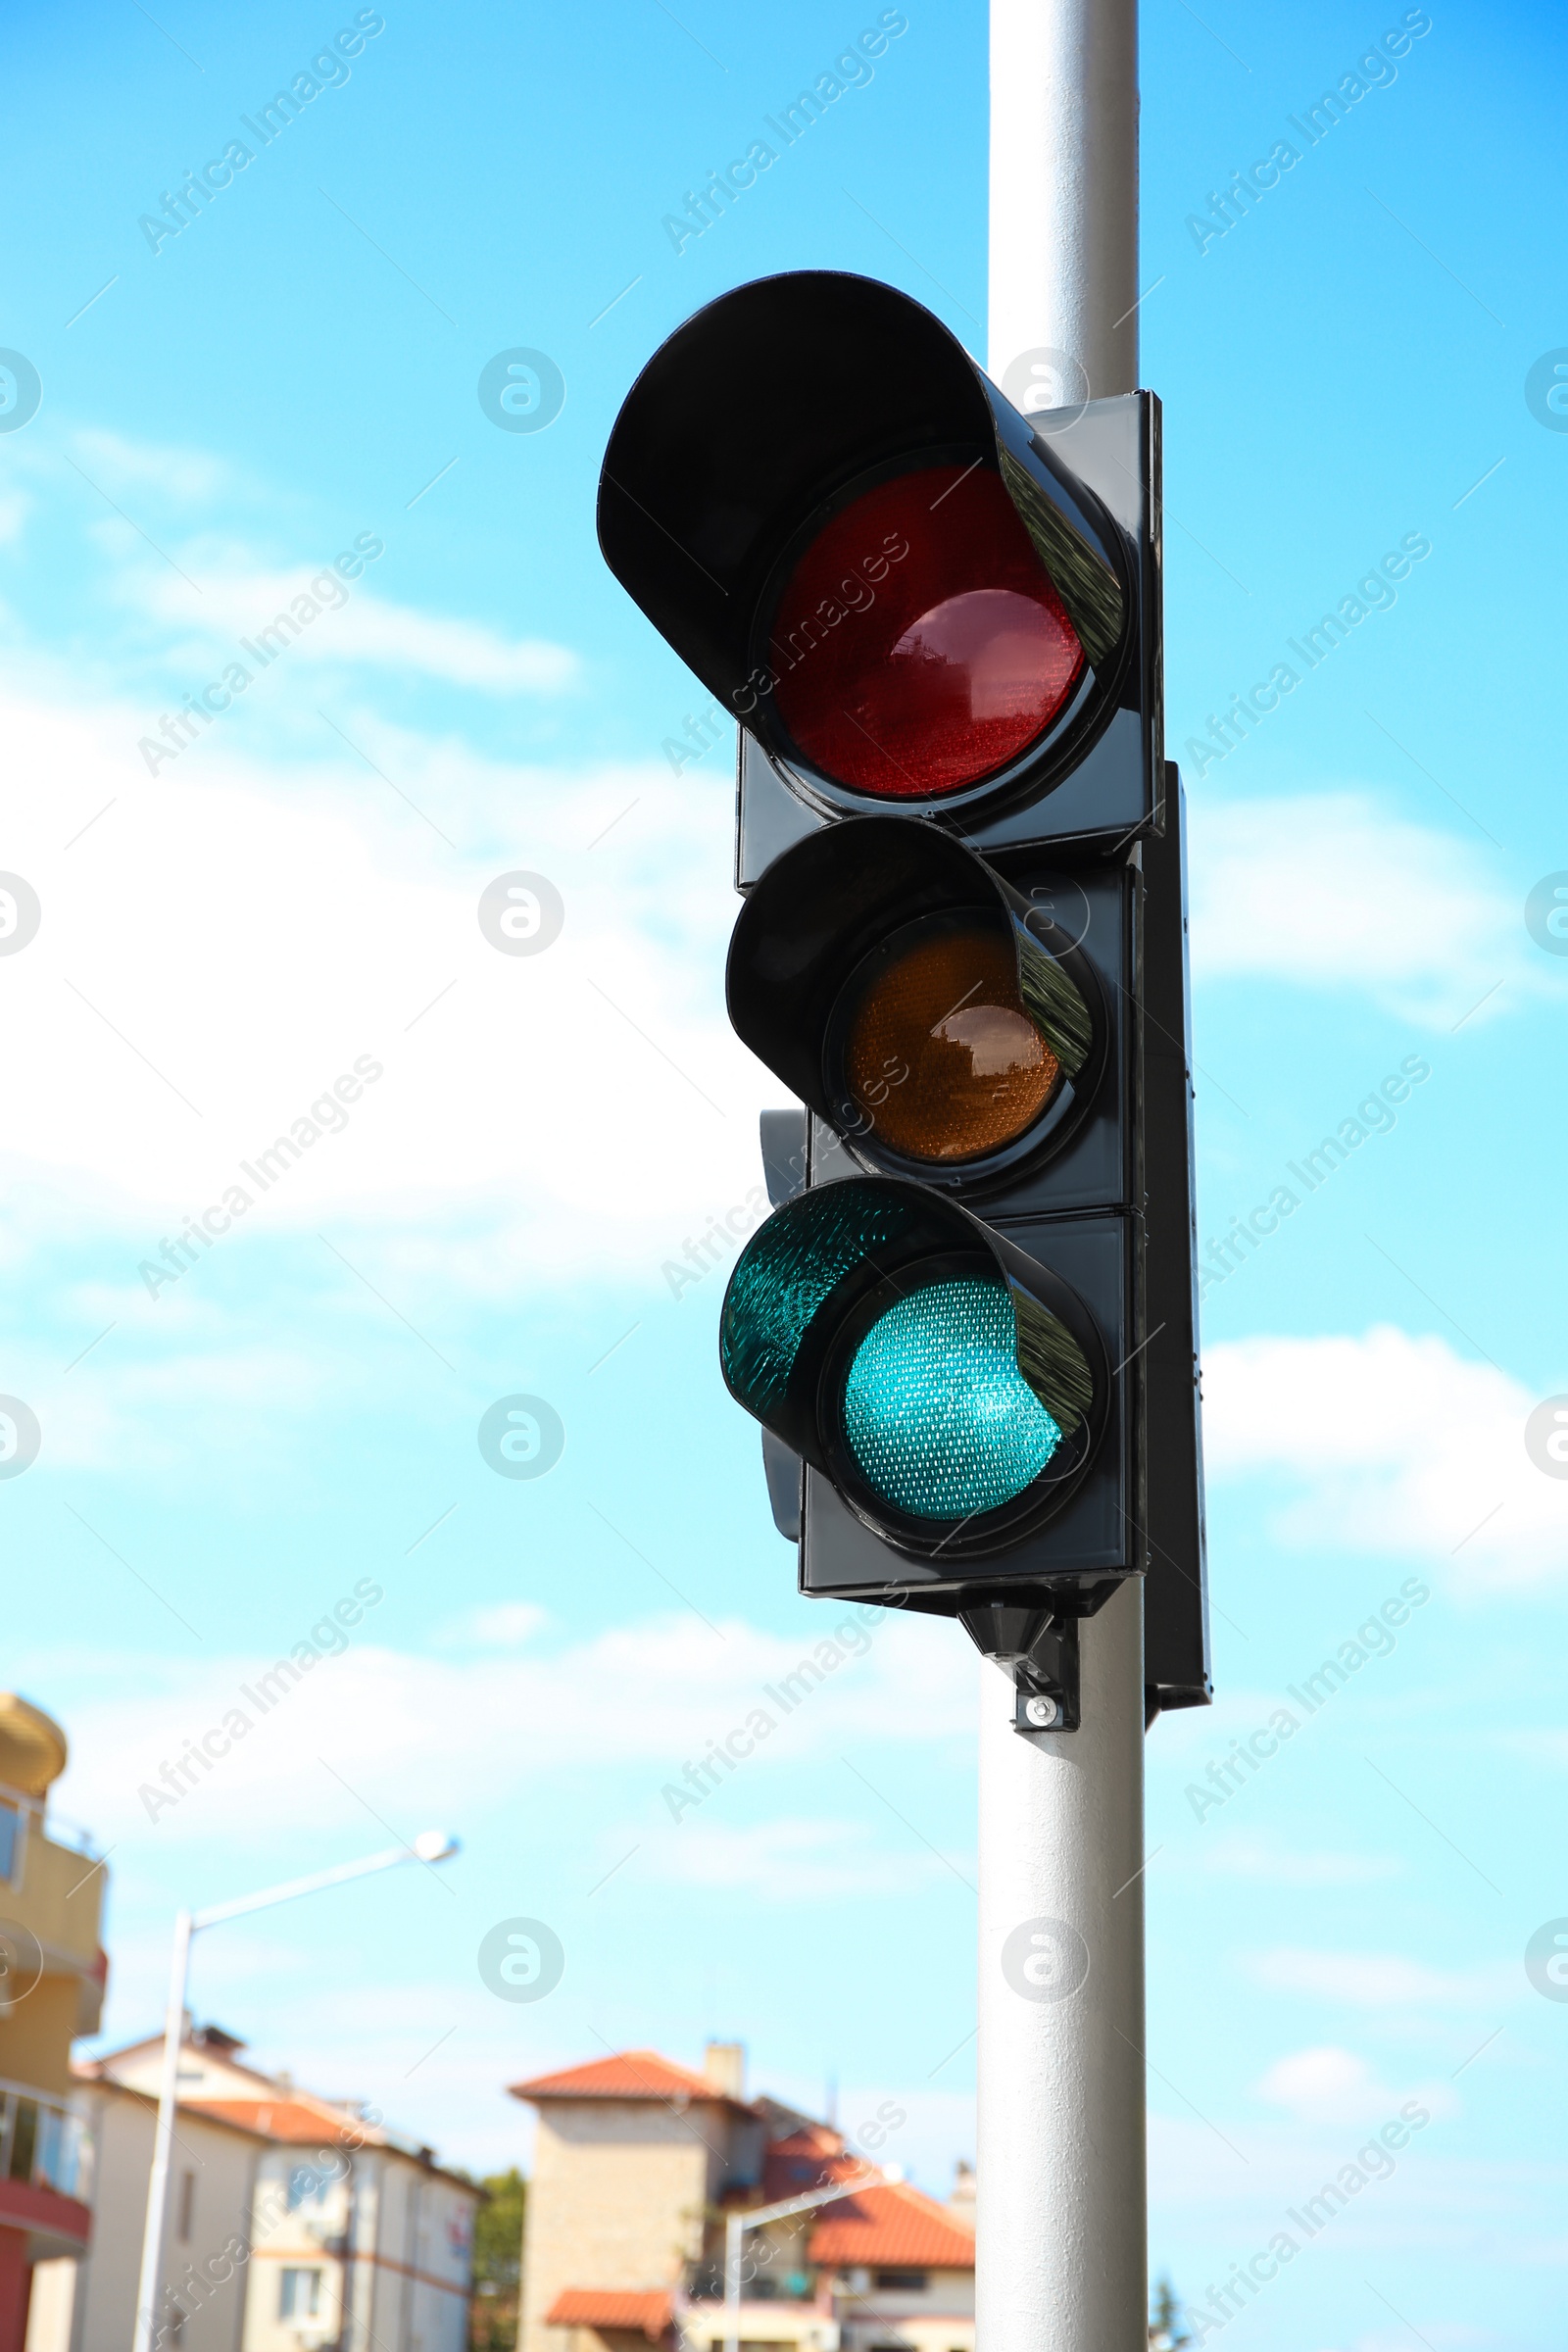 Photo of Traffic light with green sign against cloudy sky in city